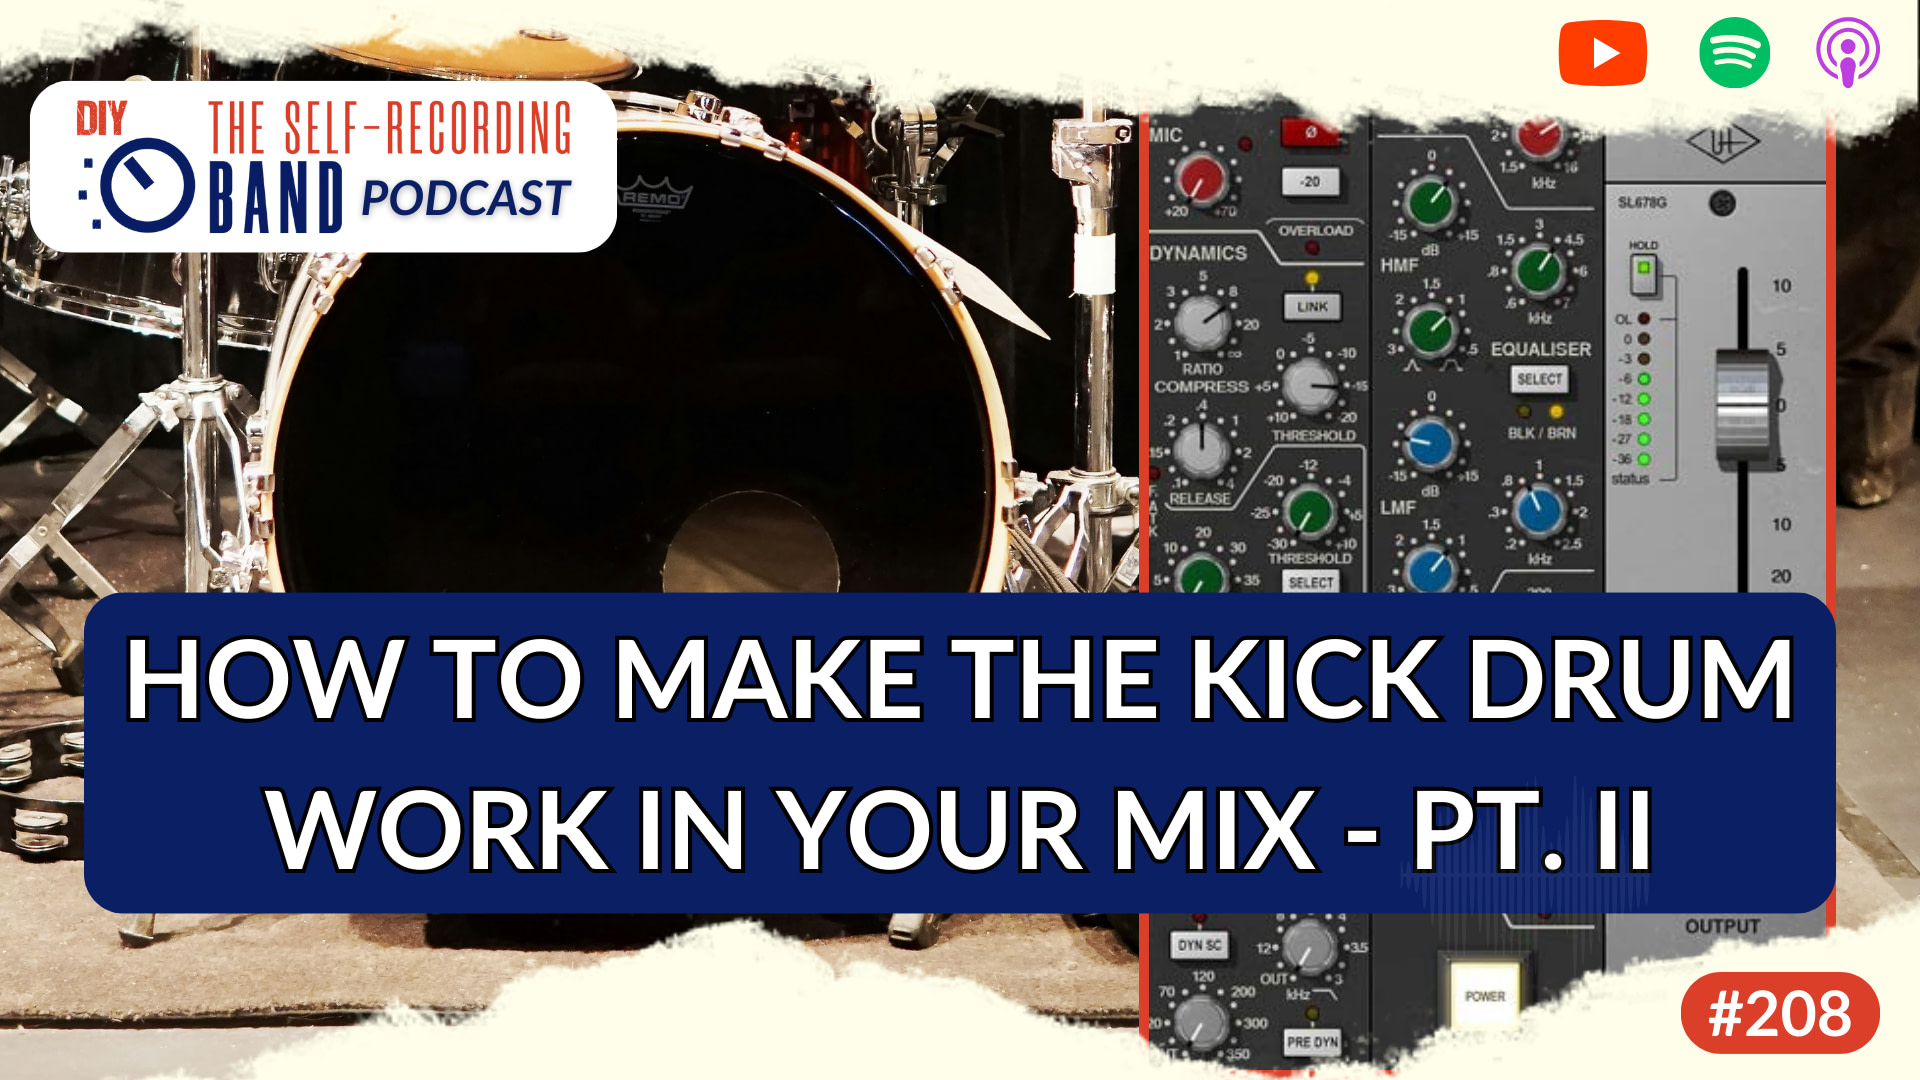 How to make the kick drum work in your mix